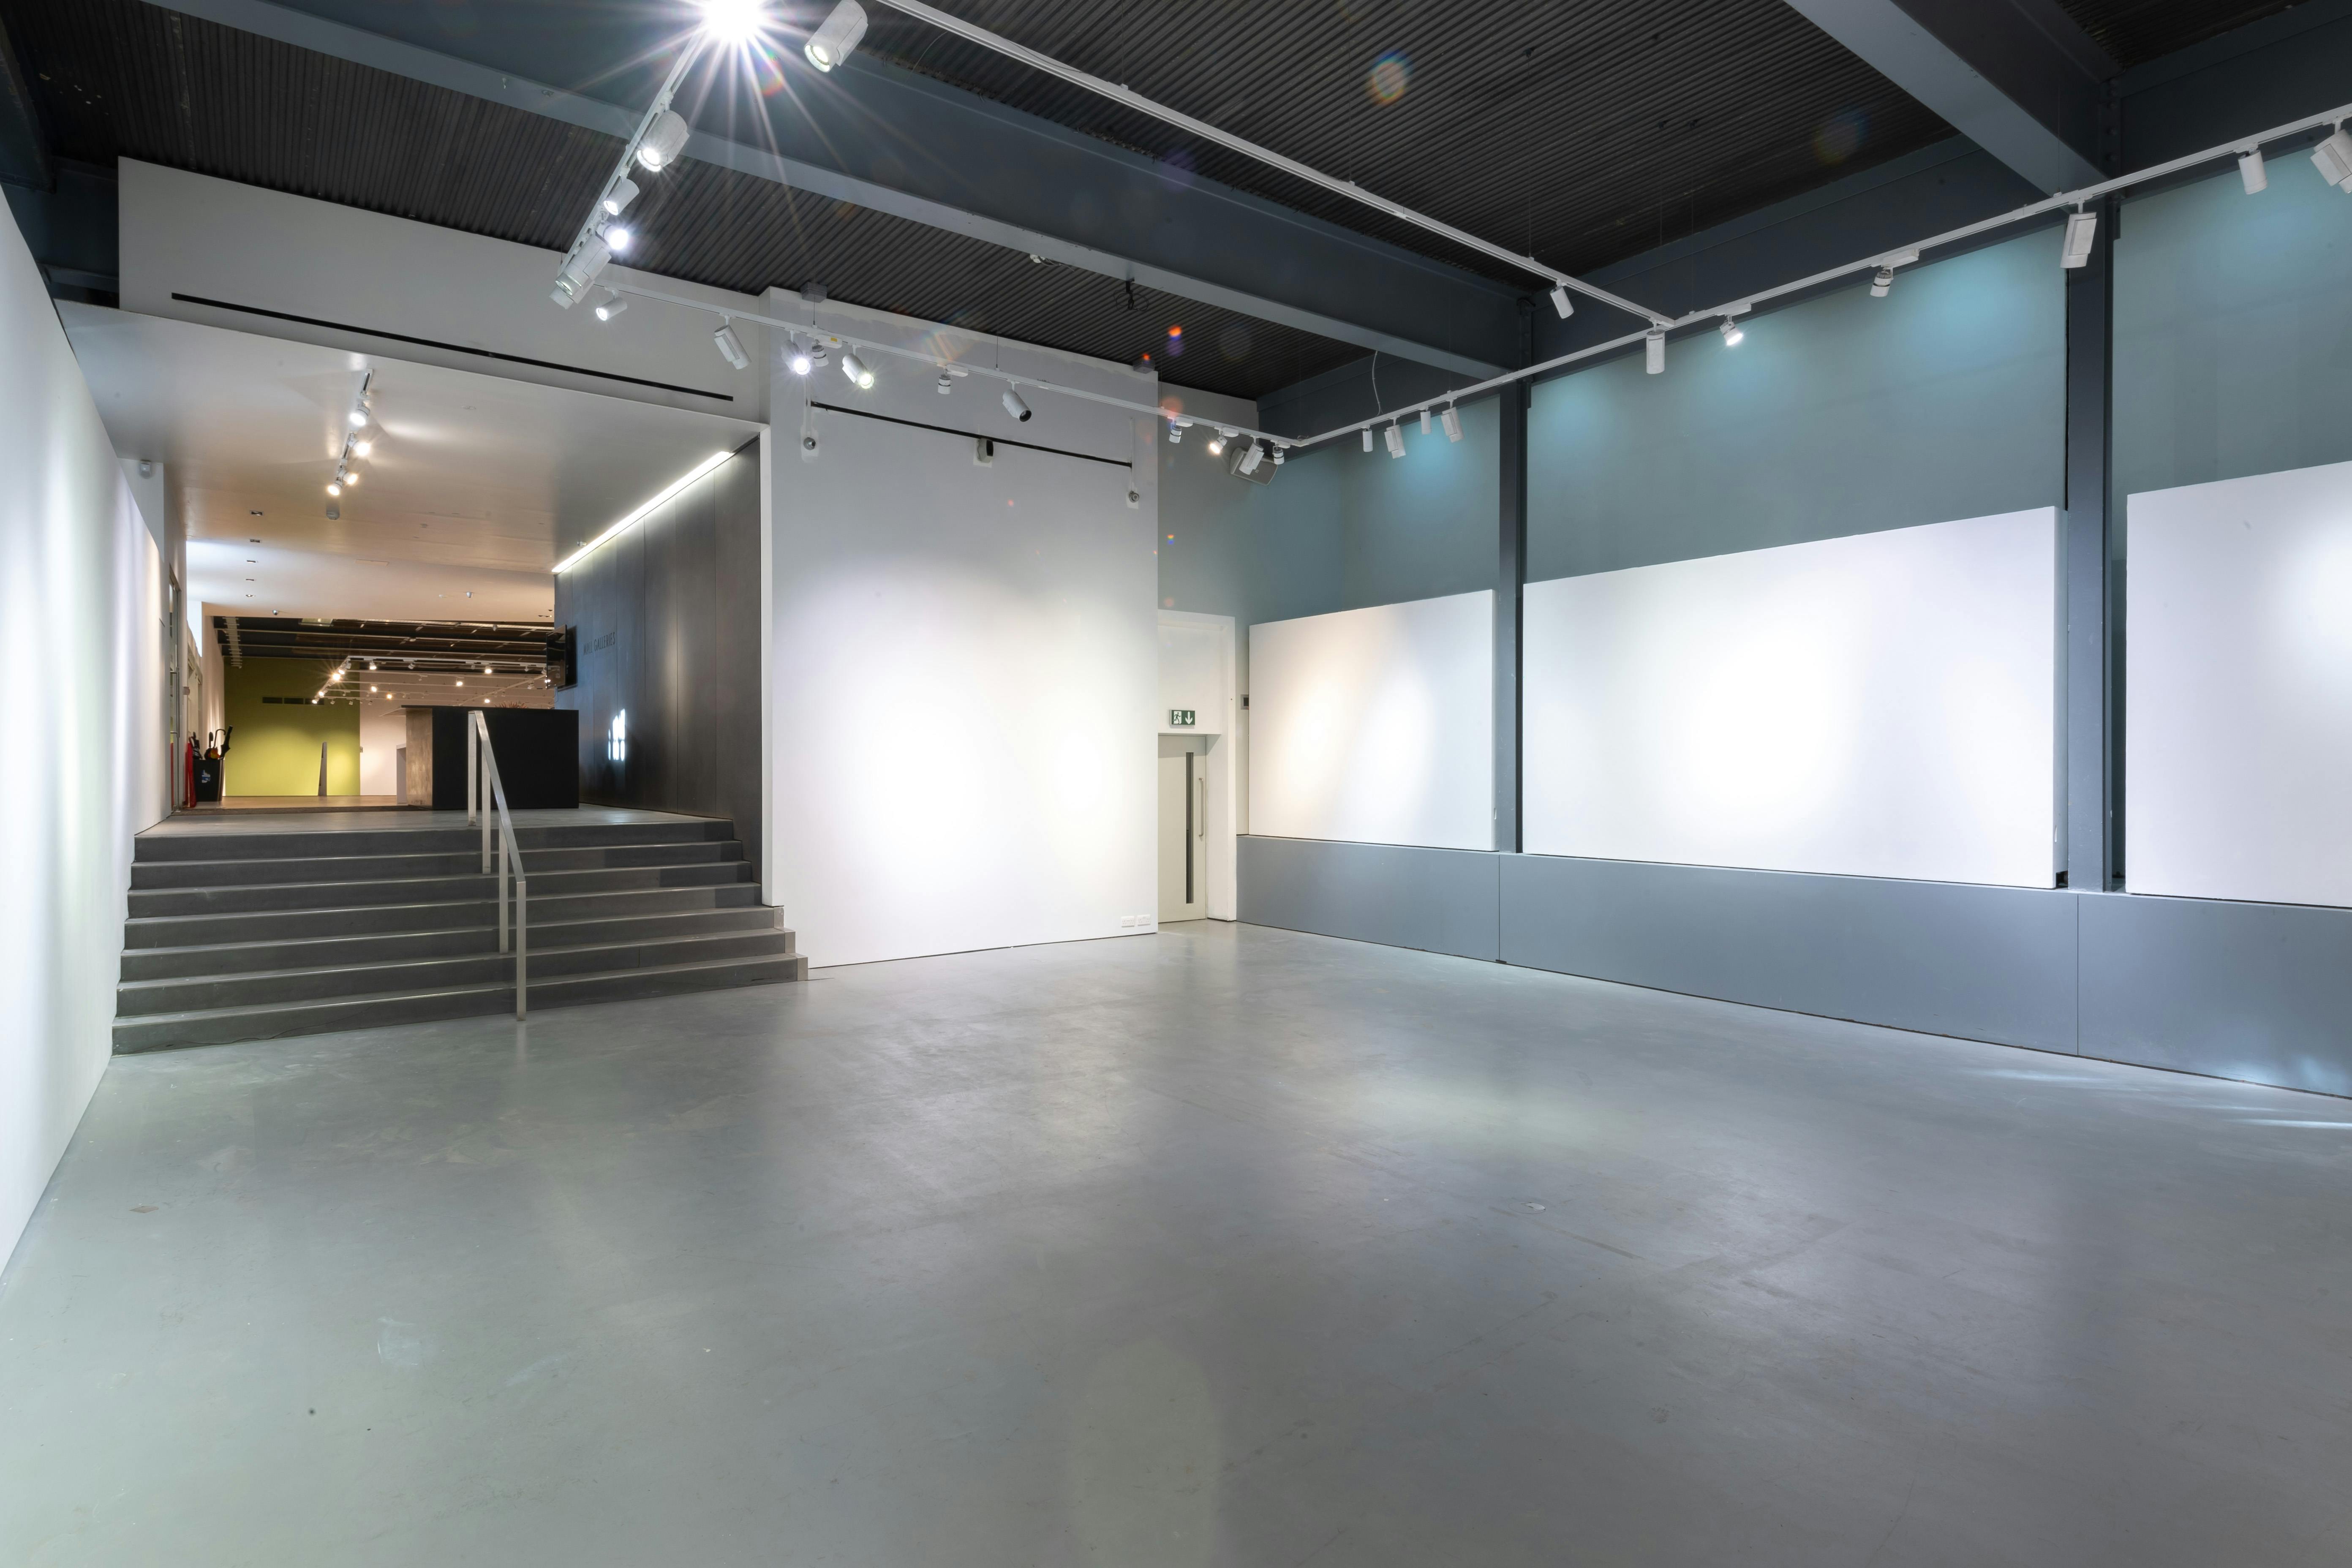 The Top 5 Gallery Event Spaces In London